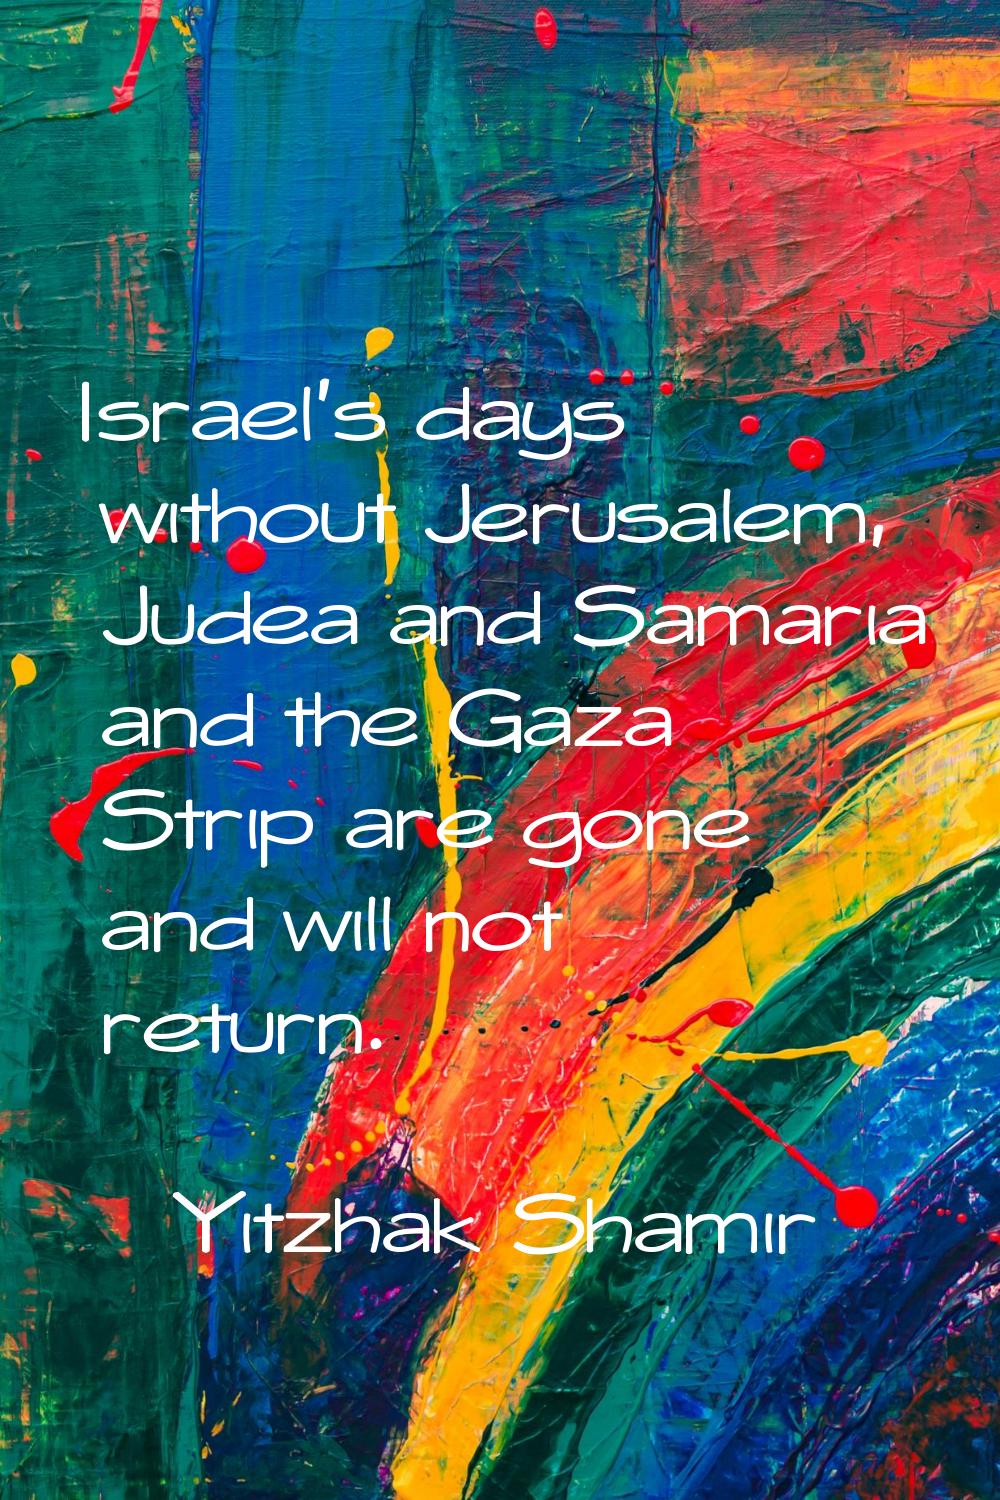 Israel's days without Jerusalem, Judea and Samaria and the Gaza Strip are gone and will not return.